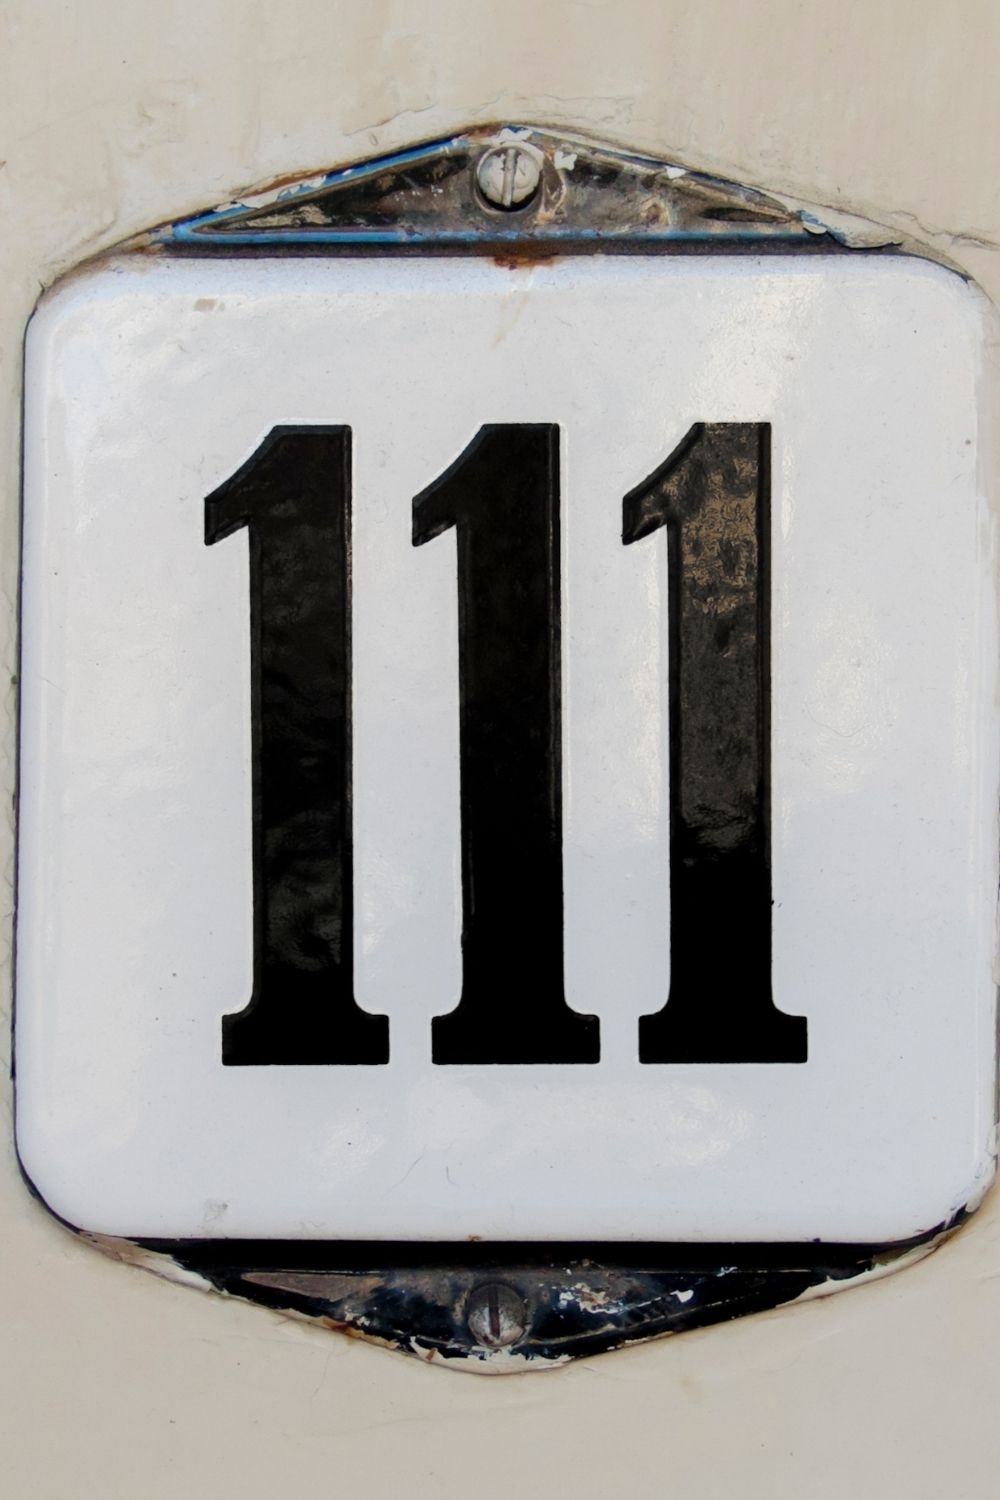 Angel Number 111 - Why This Number Is So Important